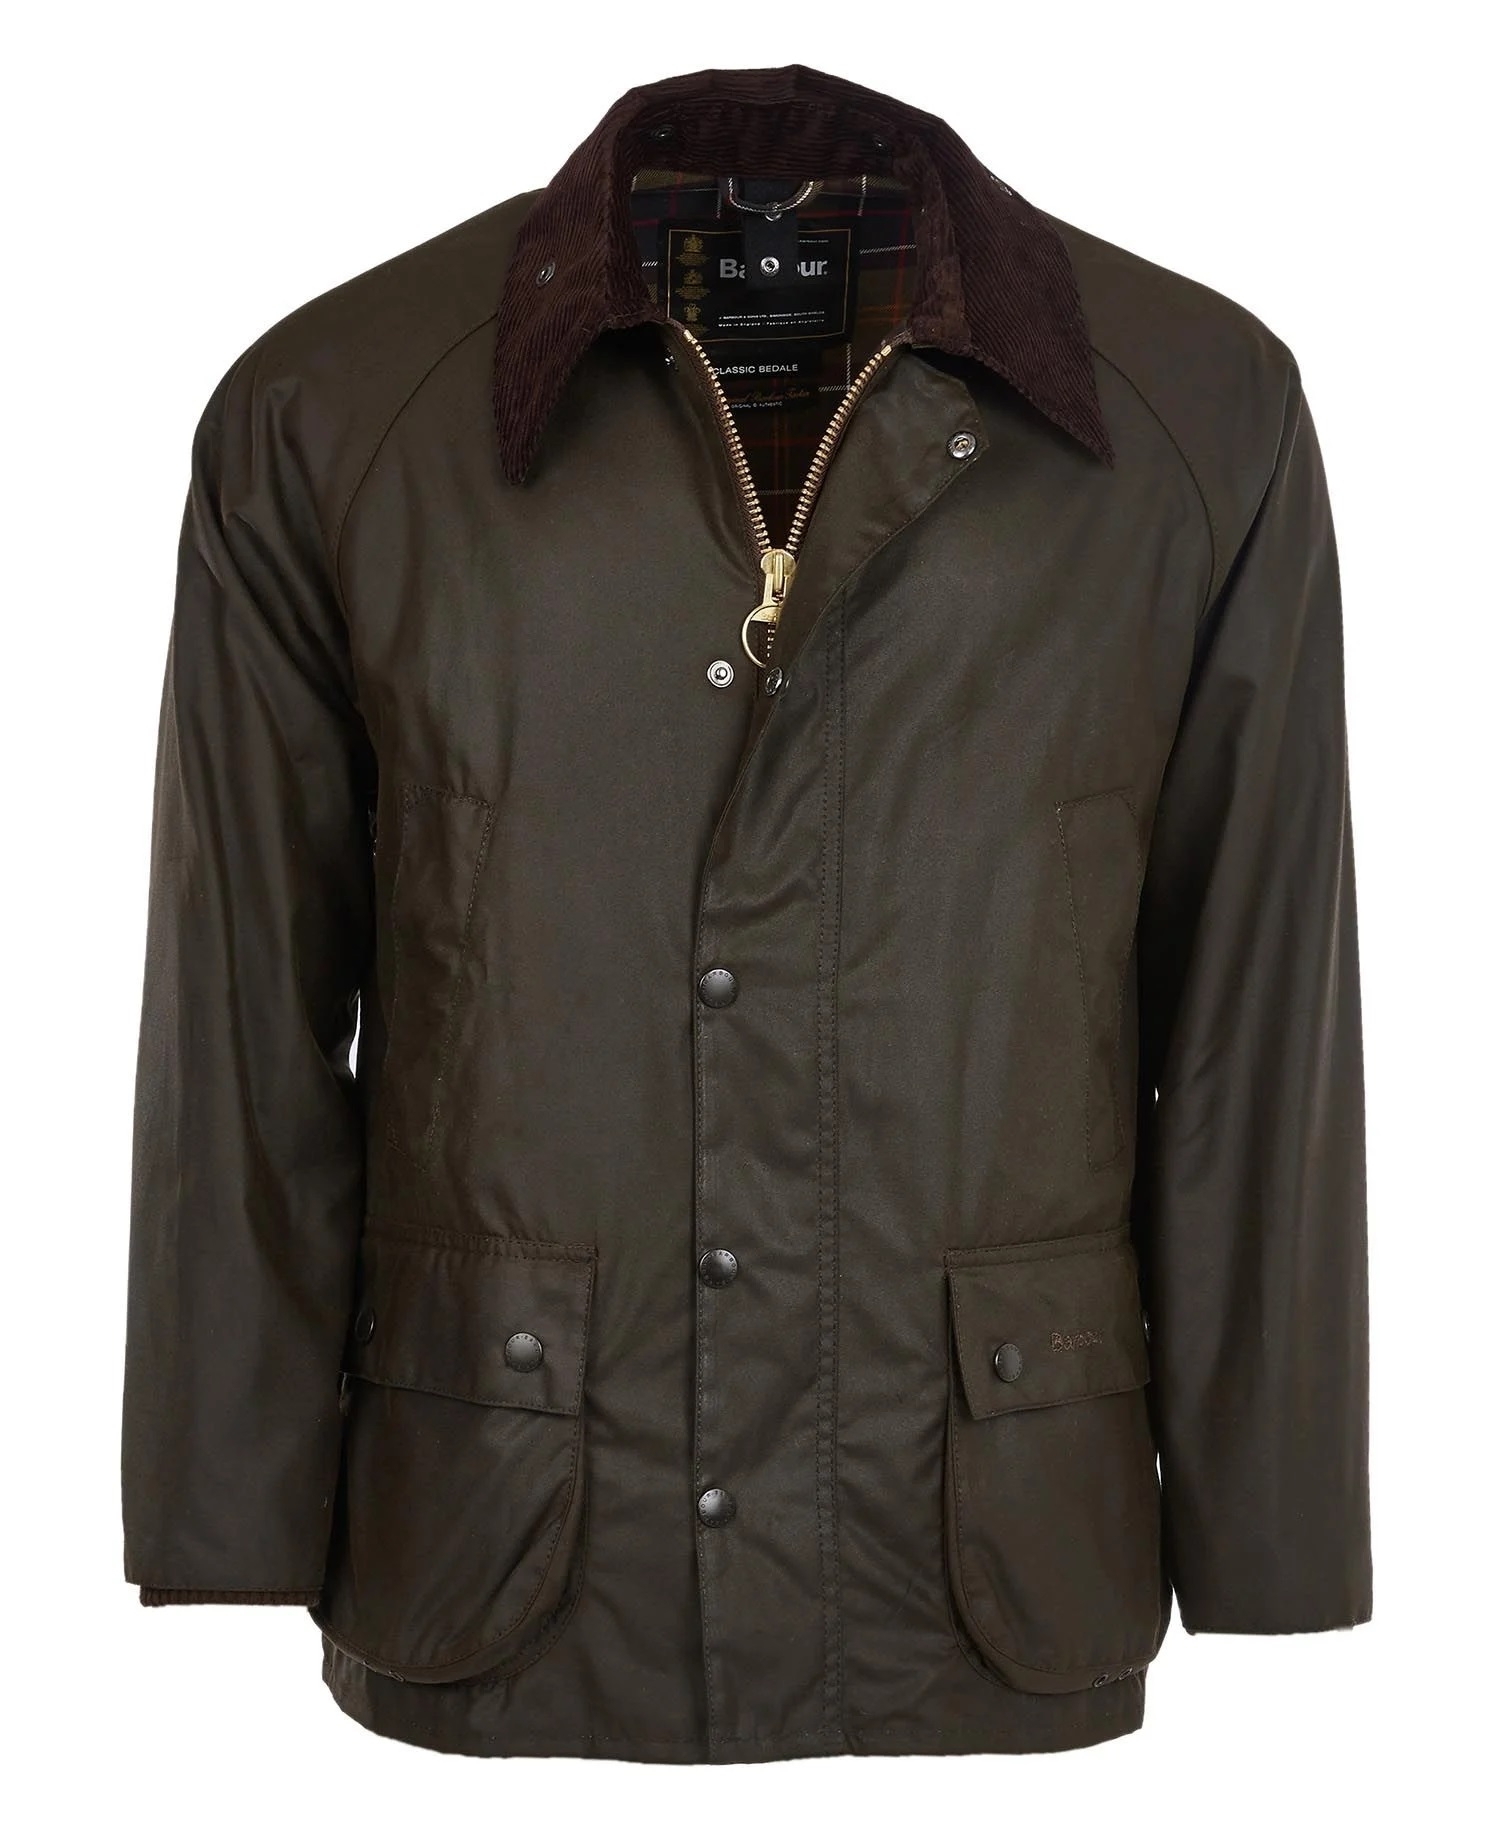 Barbour Classic Bedale Jacket at Cox the Saddler